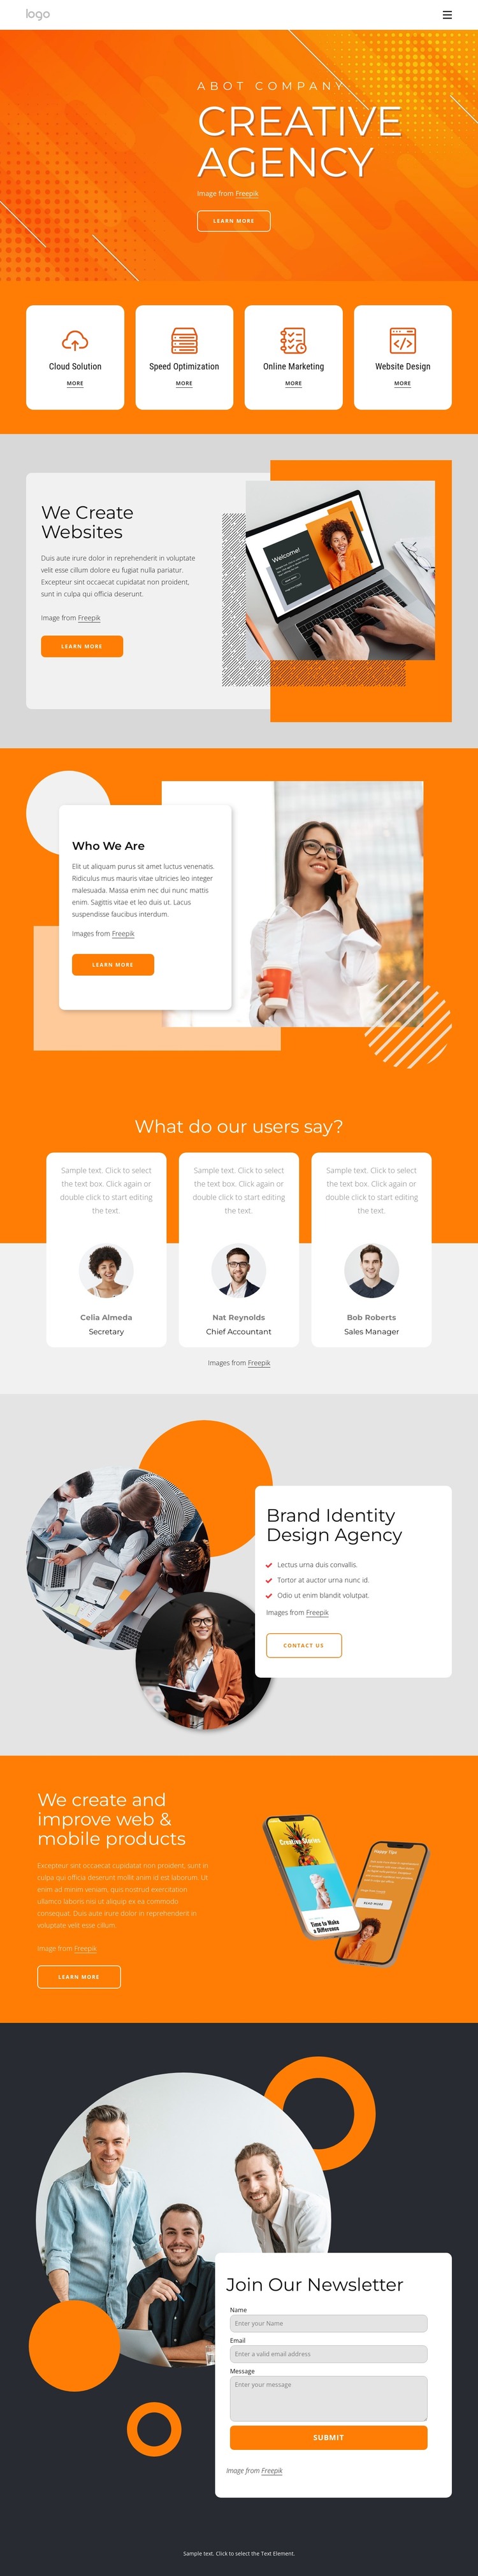 The creative agency for your next big thing WordPress Theme